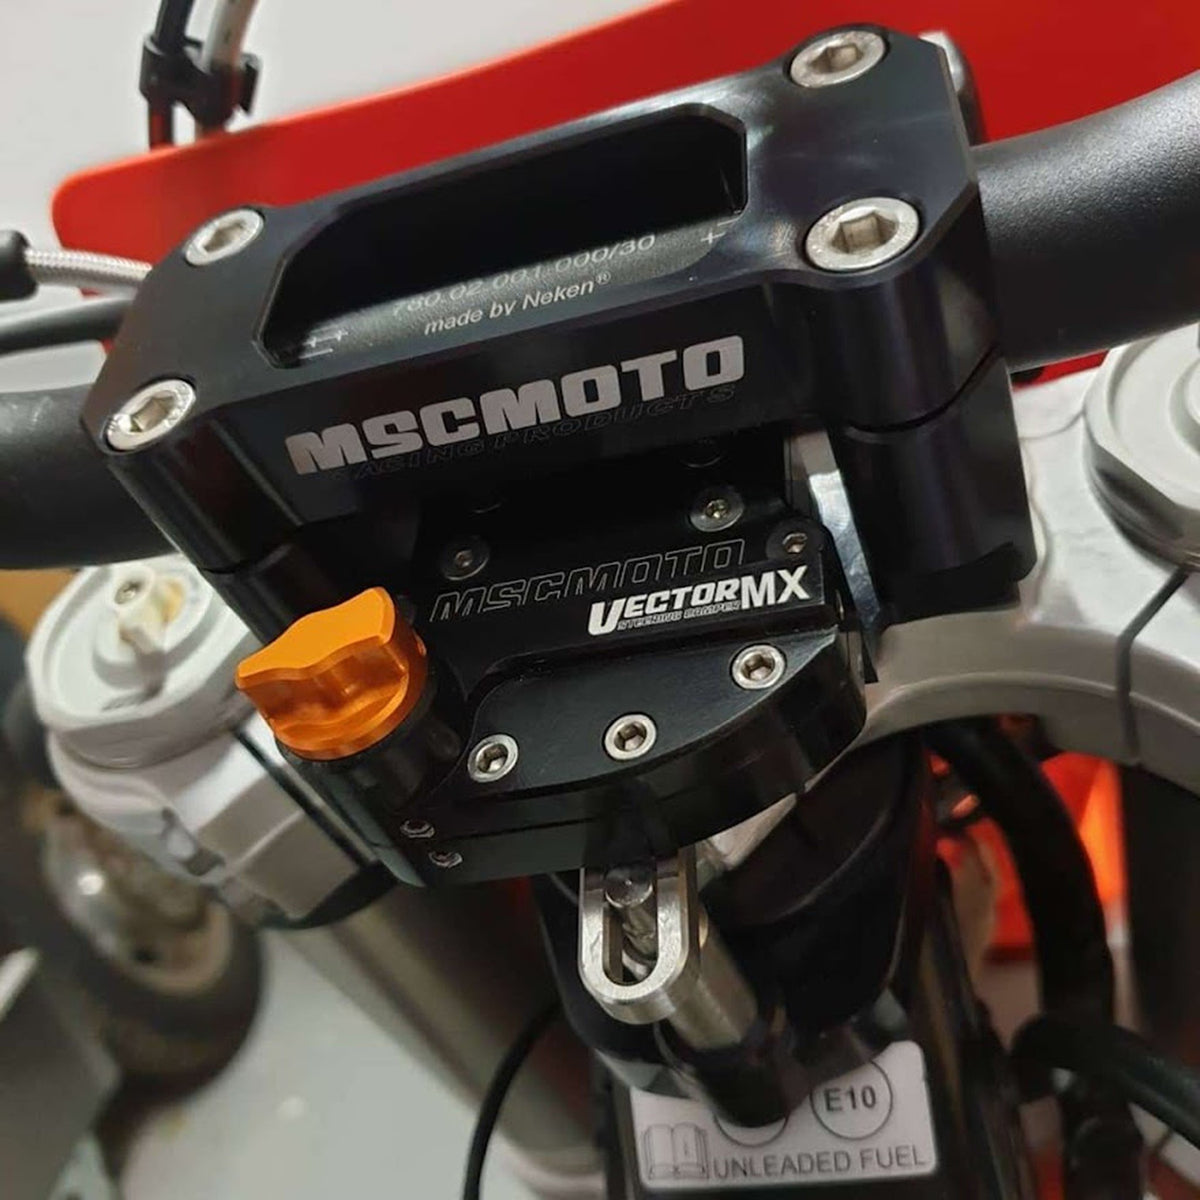 mscmotousa, VectorMX Steering Damper Kit &quot;Down Under&quot; Mount (VEC0015) - KTM 85 SX, HUSQVARNA TC 85, VEC0015, husqvarna, husqvarna-2014-tc-85-esi5591079, ktm, vectormx, , Imported and distributed in North &amp; South America by Lindeco Genuine Powersports.